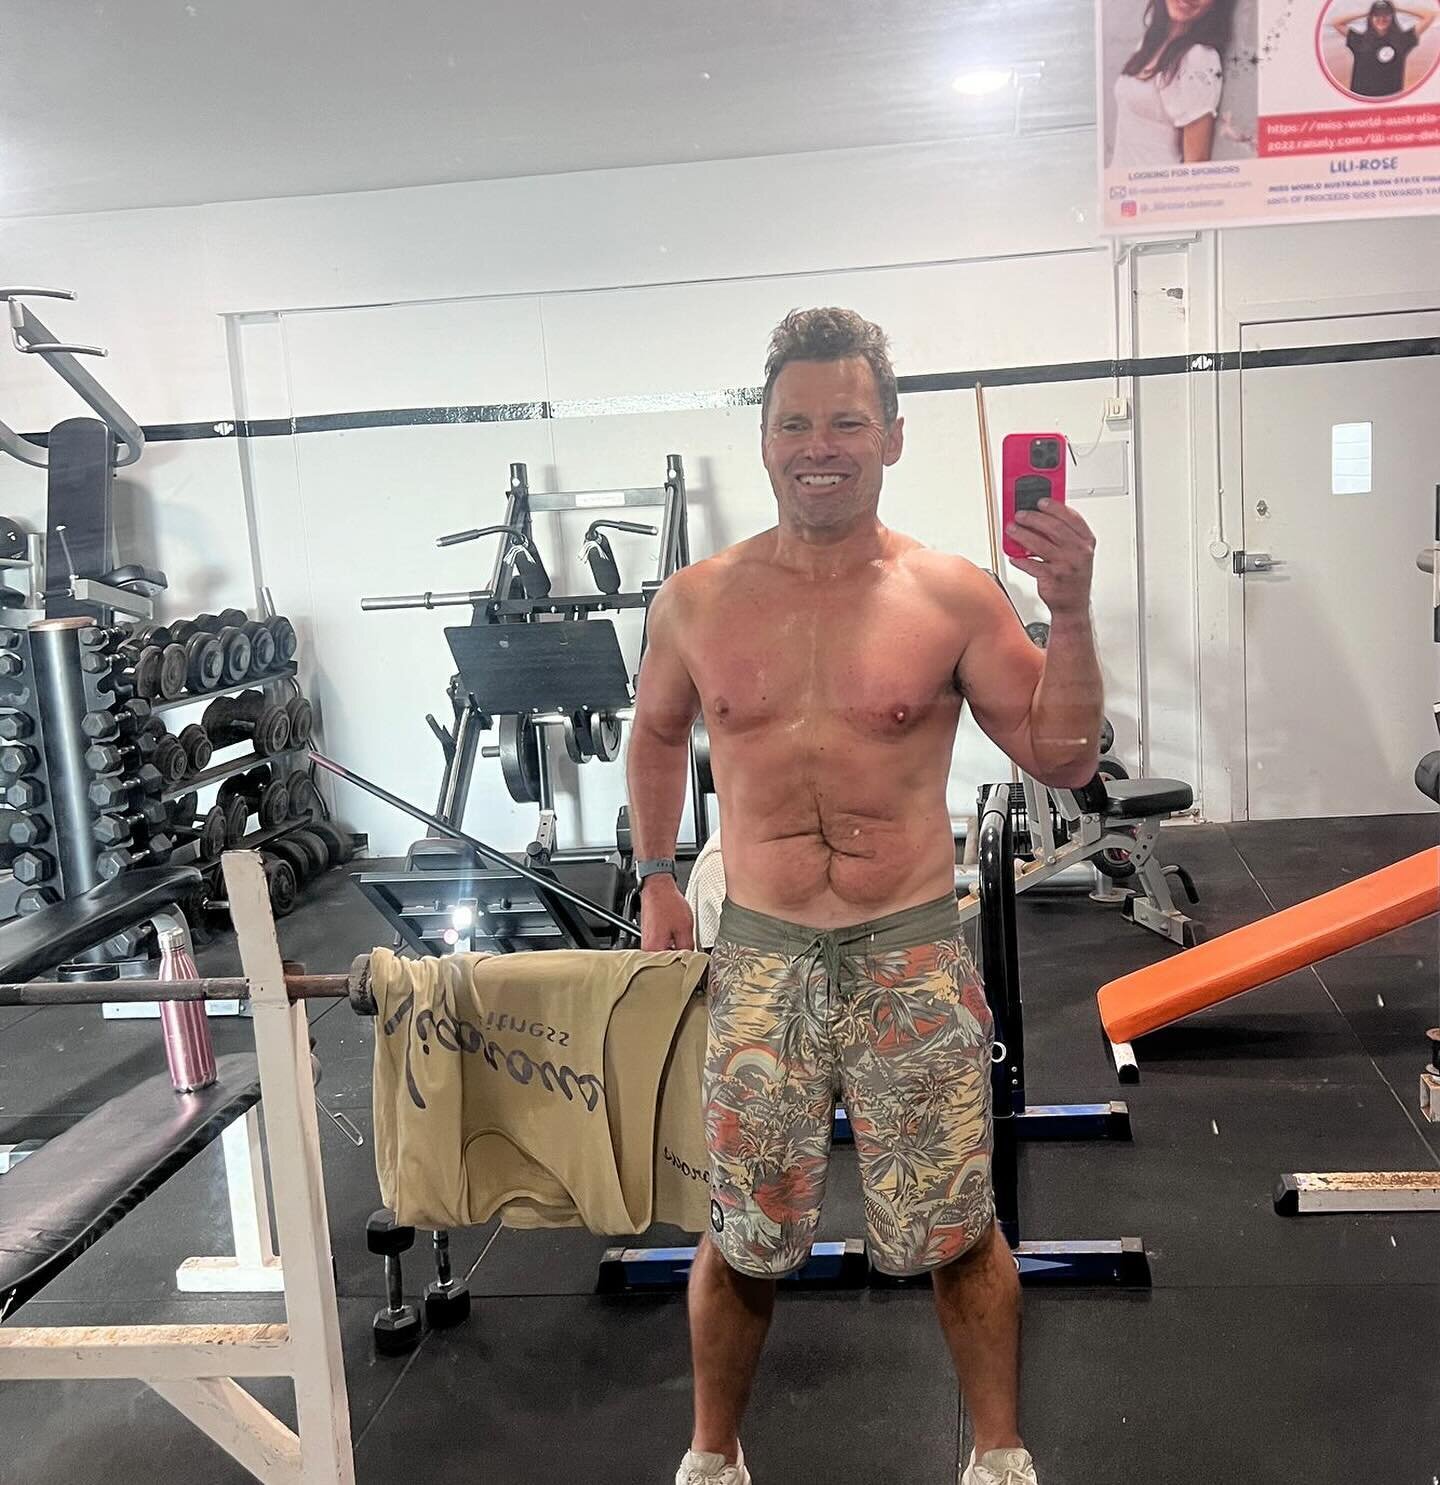 Our Vigorous Fitness😱founder, Sean O&rsquo;Brien, is keeping it real with his post-Easter update:

&ldquo;BIG Thx&rsquo;s to O&rsquo;Brien family, 
for feeding me up, an extra 3.8kg over Easter🐣 long weekend🤔&rdquo;

📆Wed 27th Mar 2024
Weight: 79